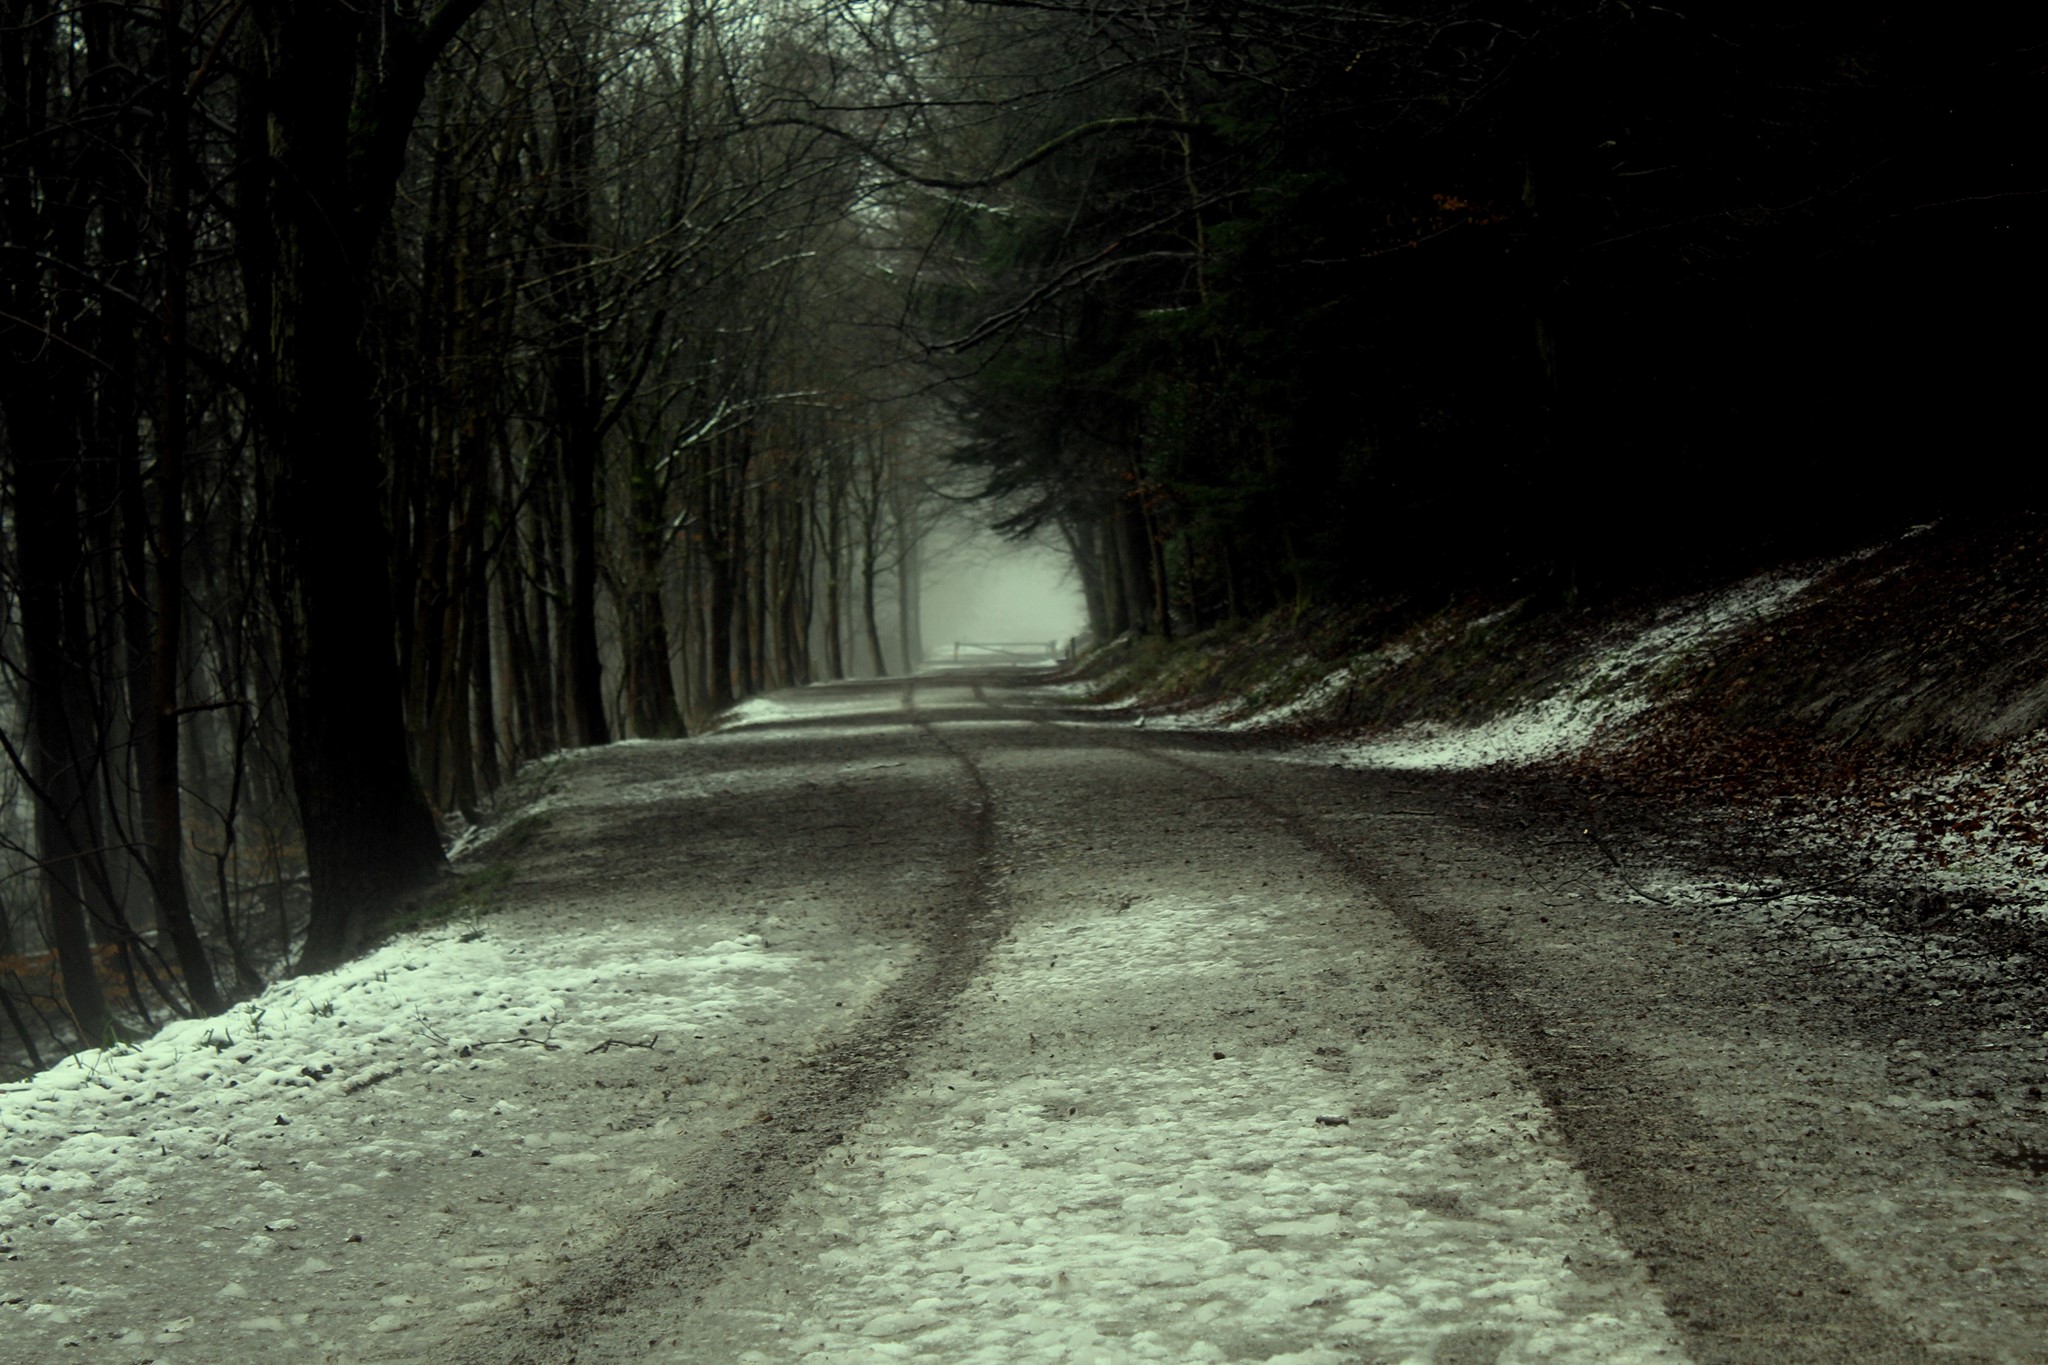 snowy atmosphereic lane in the forest with tyre tracks